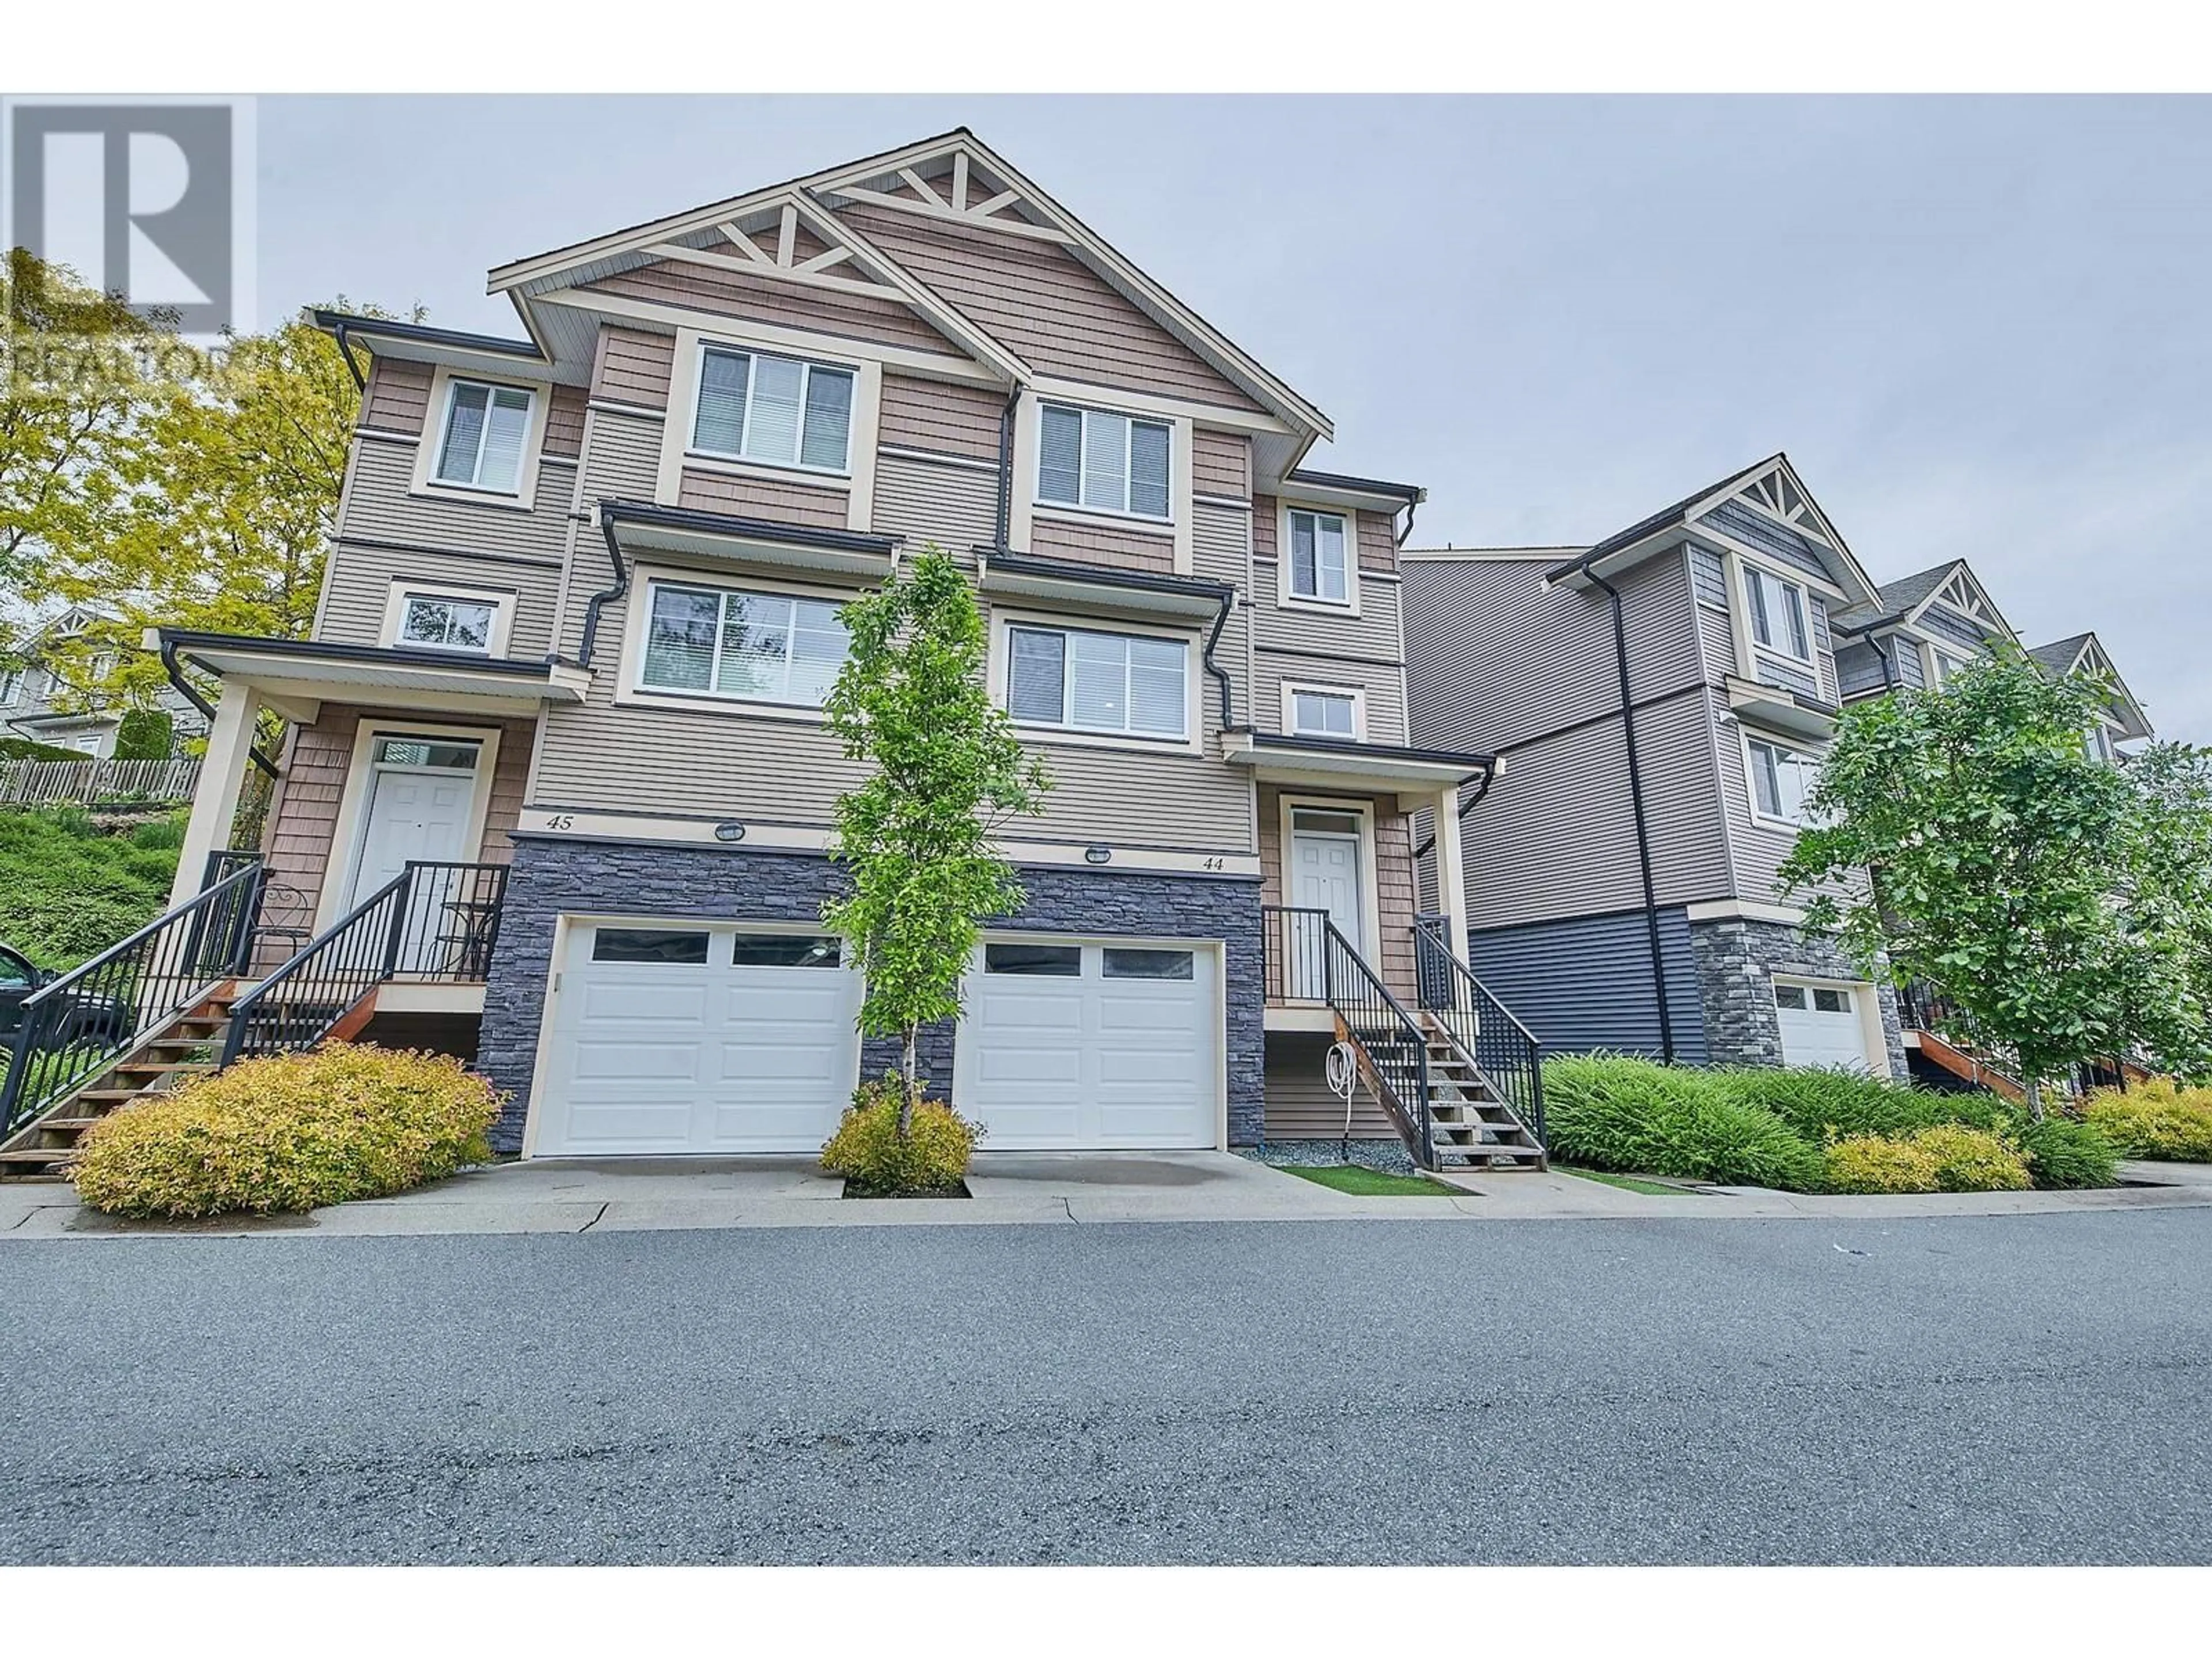 A pic from exterior of the house or condo for 44 11252 COTTONWOOD DRIVE, Maple Ridge British Columbia V2X9B1